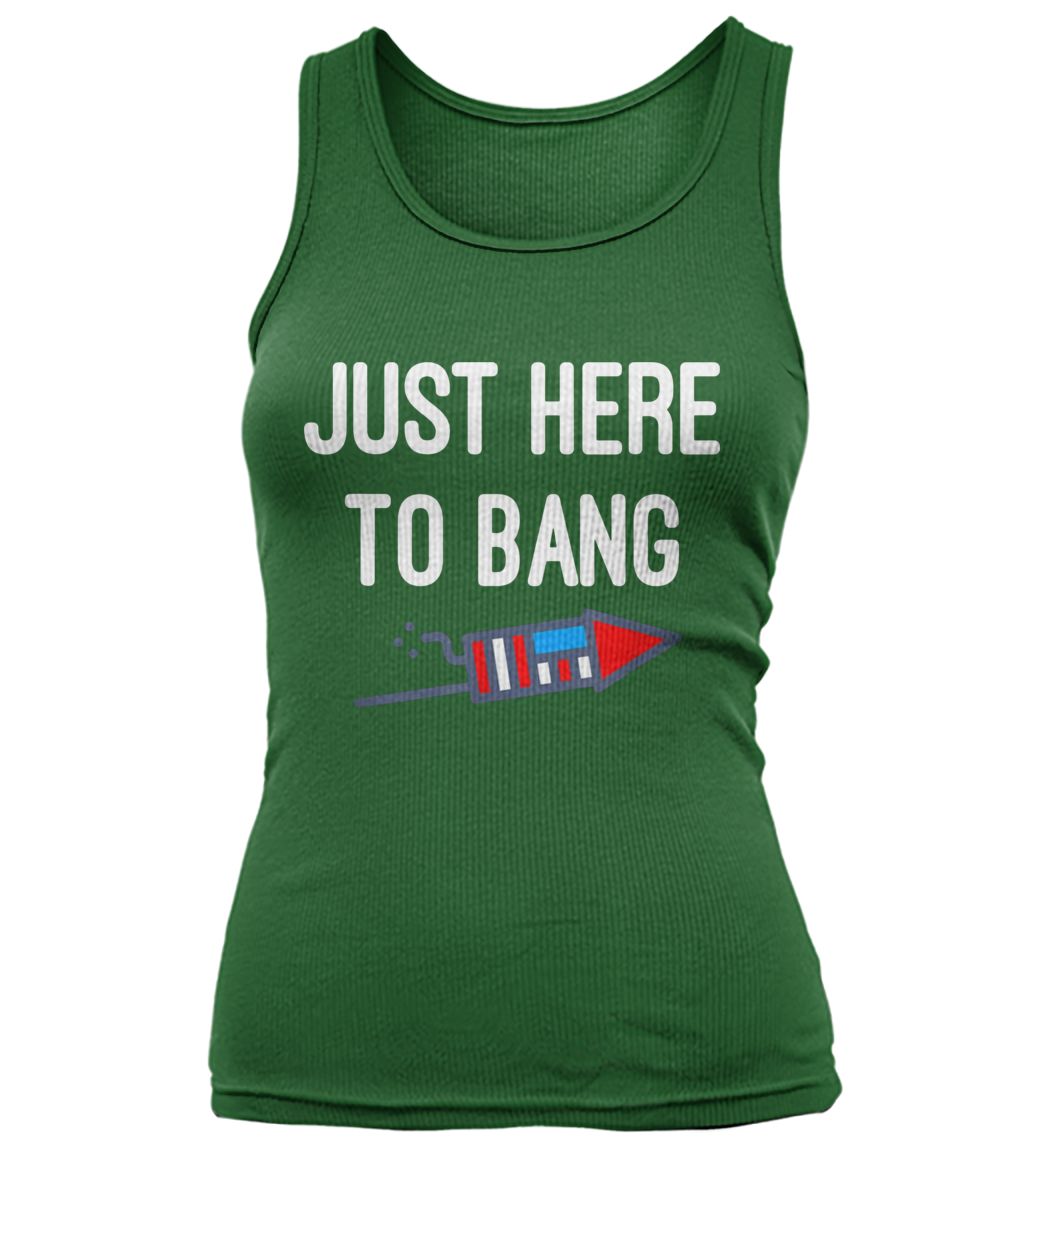 Just here to bang 4th of july women's tank top